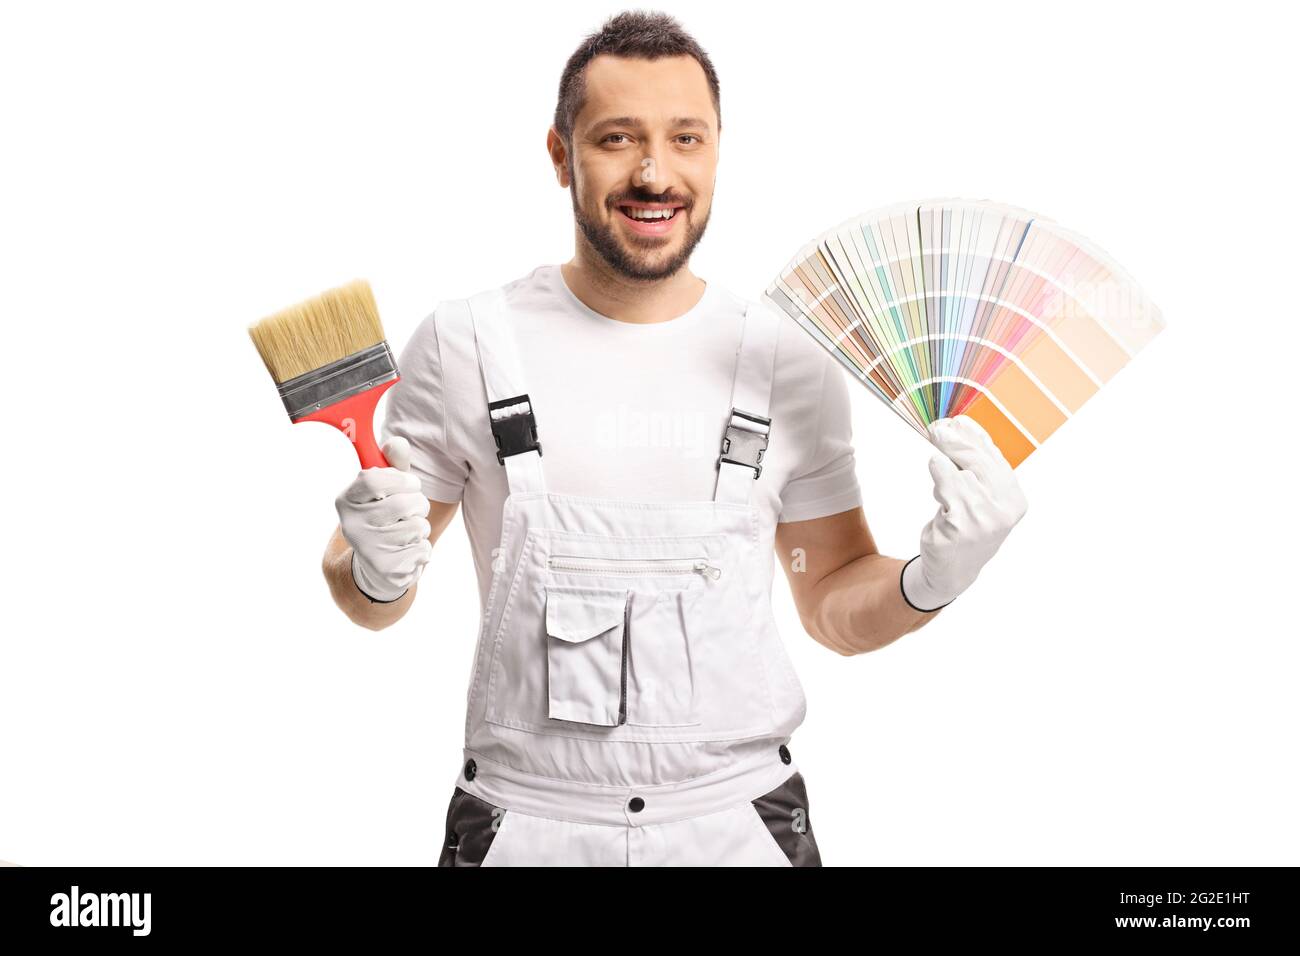 Painter in a white uniform holding a color palette and a brush isolated on white background Stock Photo